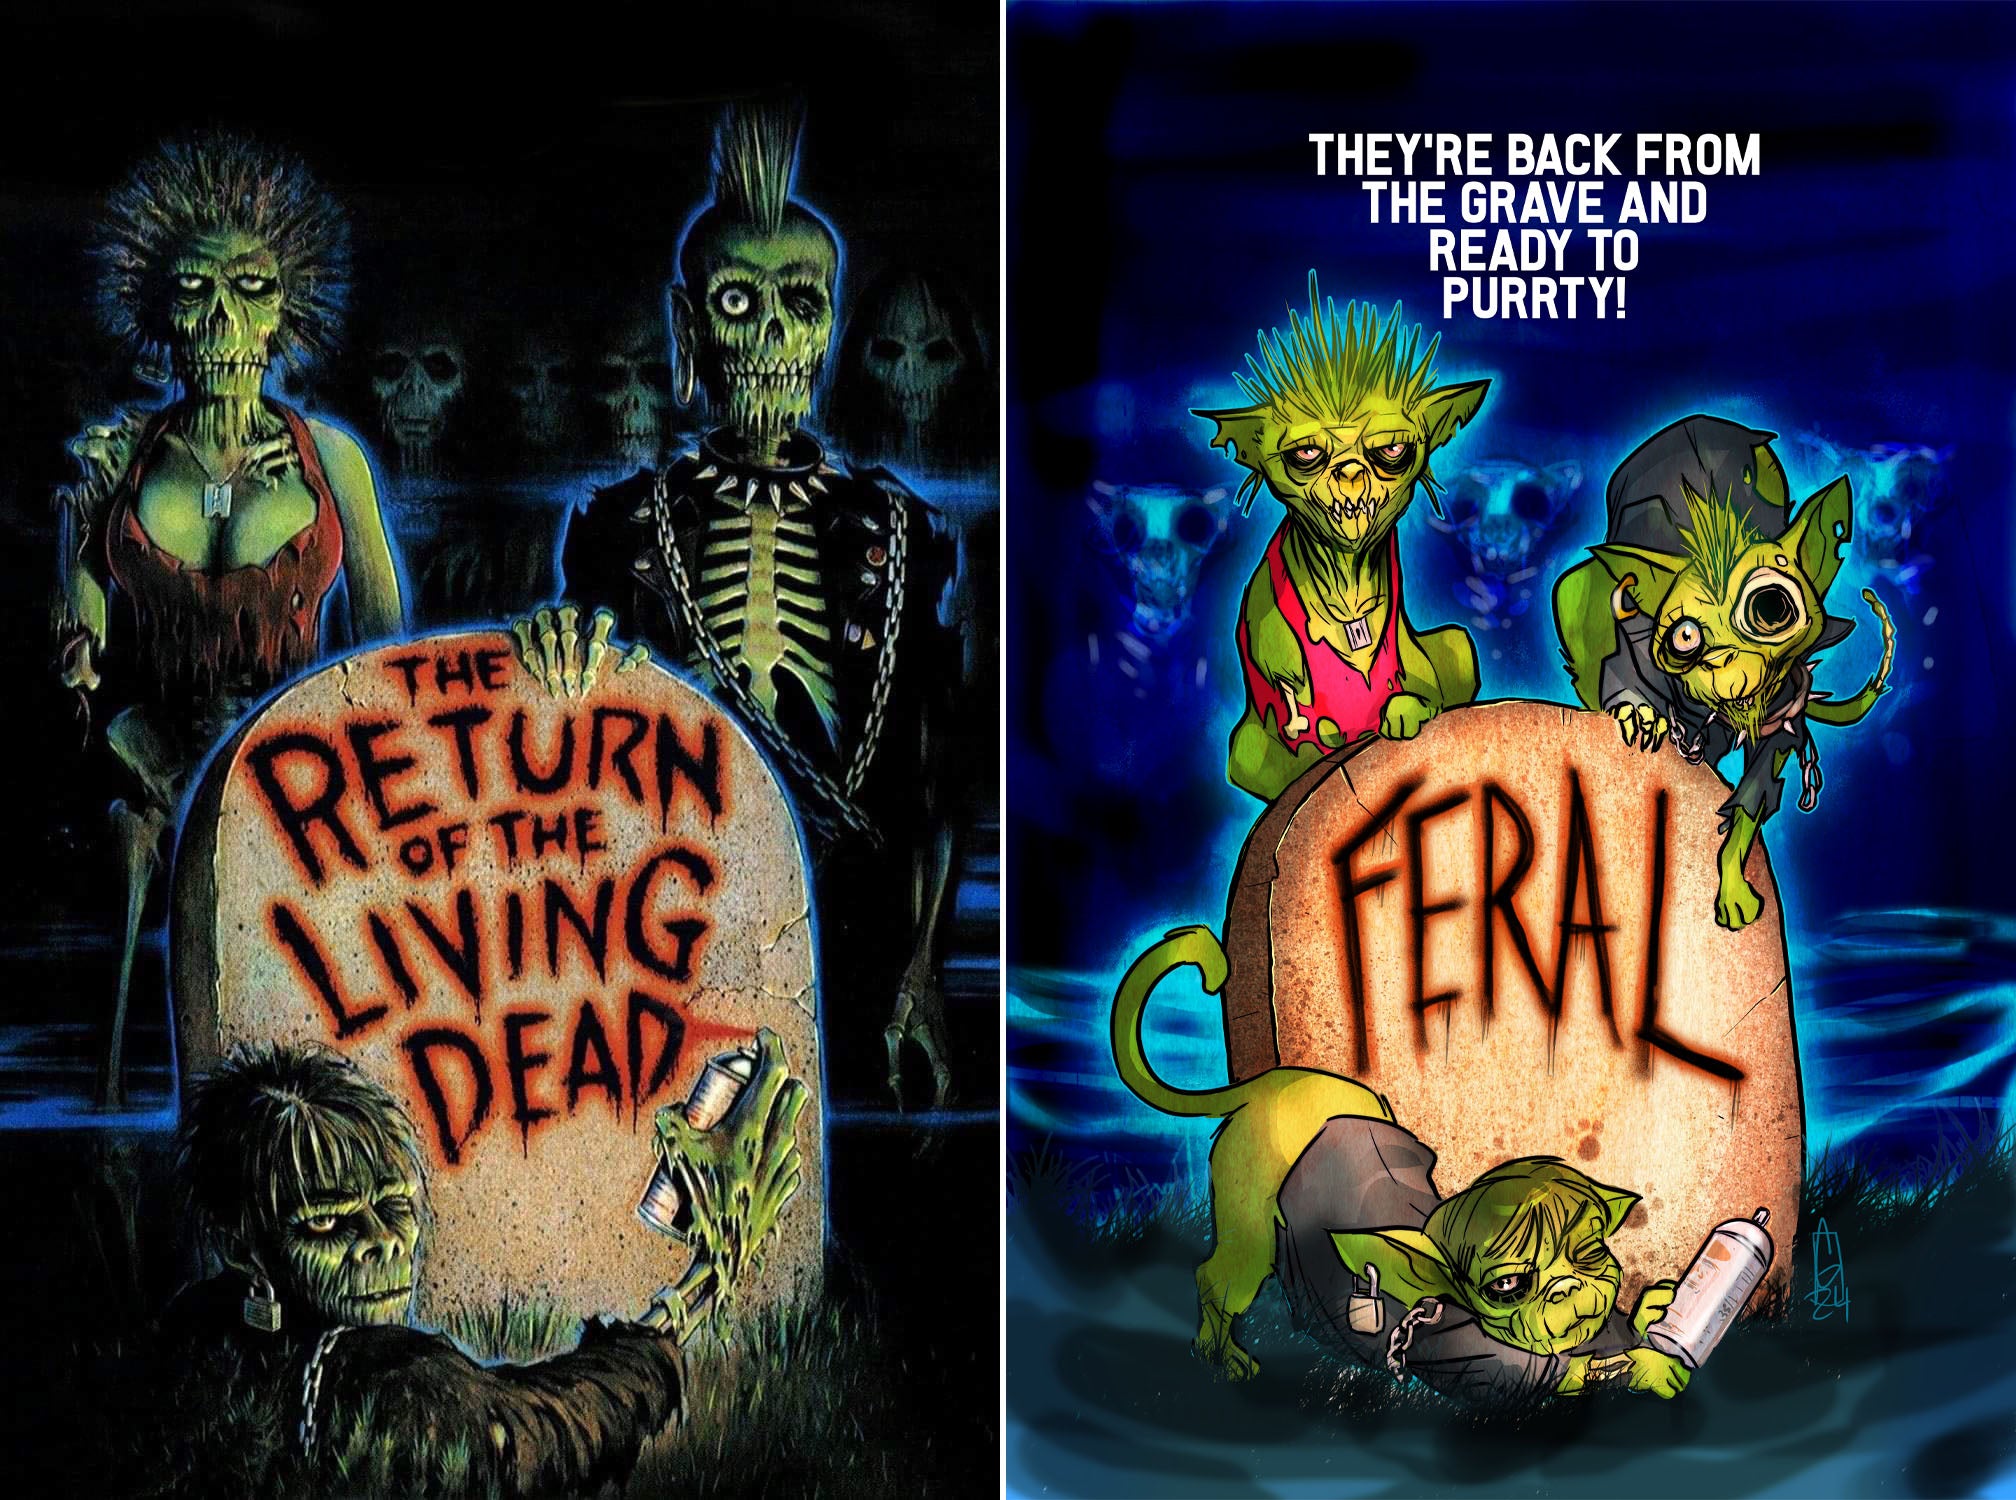 FERAL #1 CHRIS GUGLIOTTI "THE RETURN OF THE LIVING DEAD" HOMAGE- 03/27/24